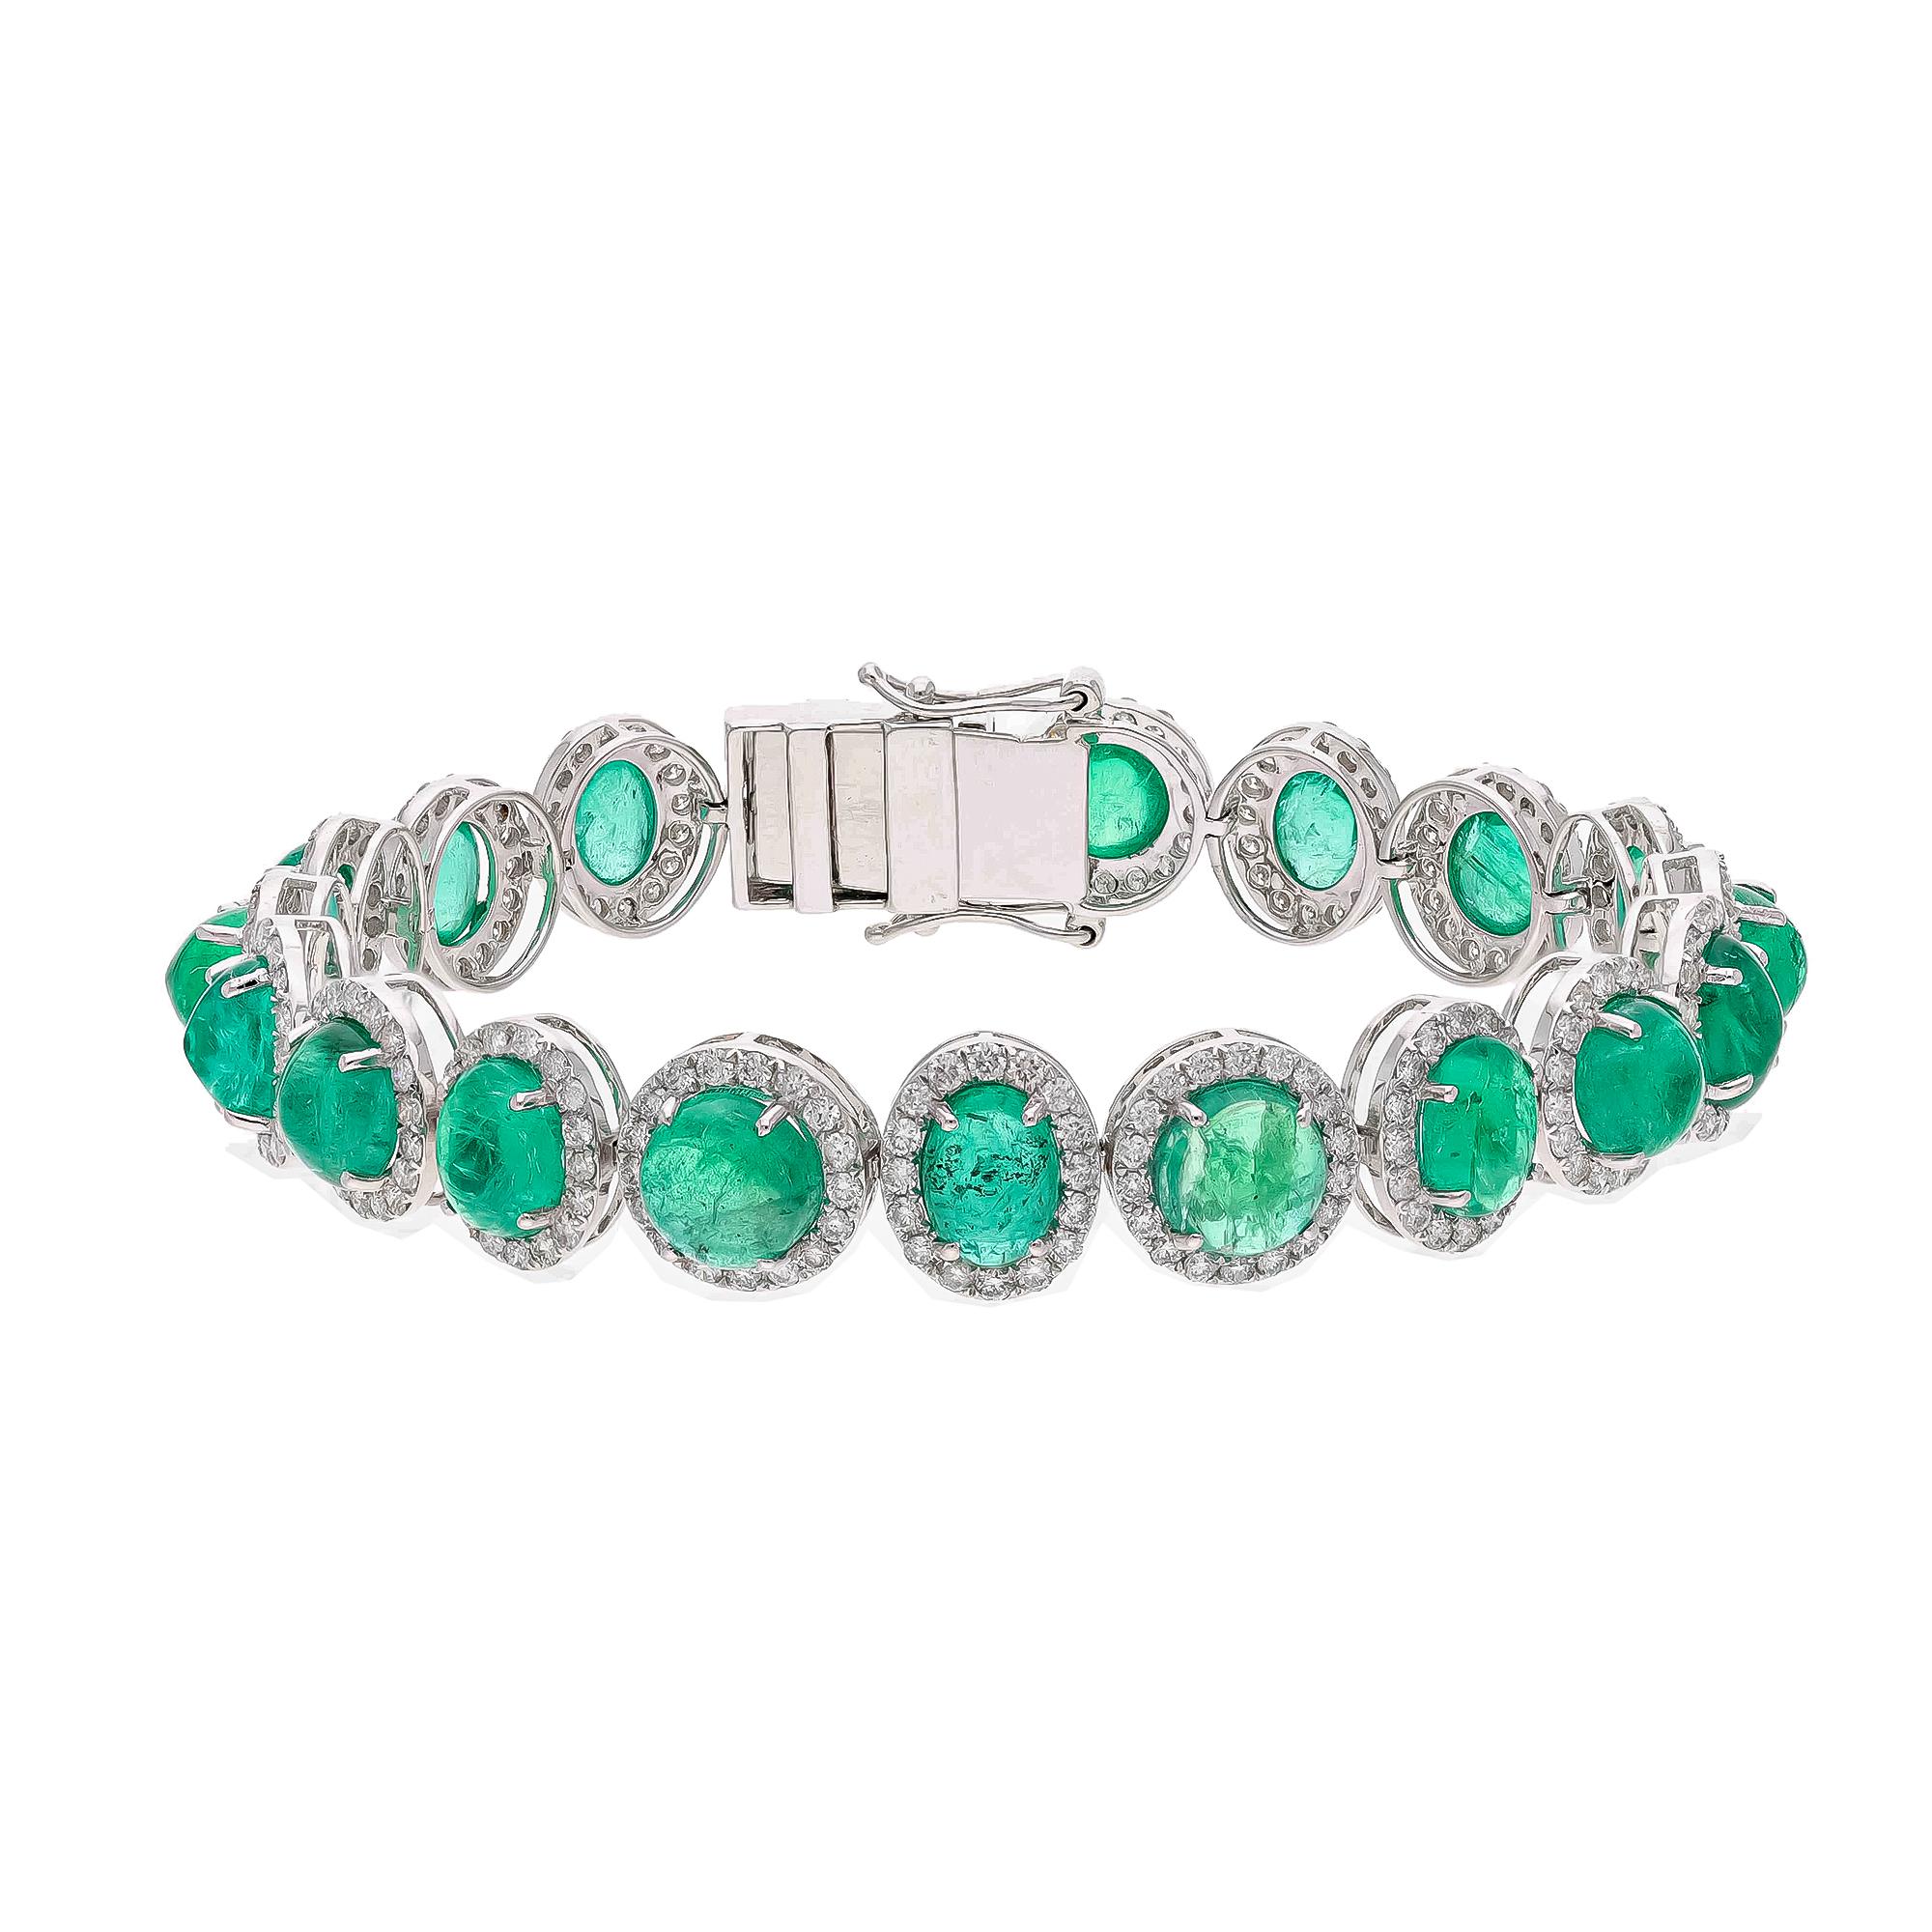 This is a natural Zambian Emerald bracelet with diamonds and 18k gold. The emeralds are very high quality and very good quality diamonds the clarity is vsi and G colour


Emeralds : 20.93 carats
diamonds : 3.49carats
gold : 15.246 gms

This is a